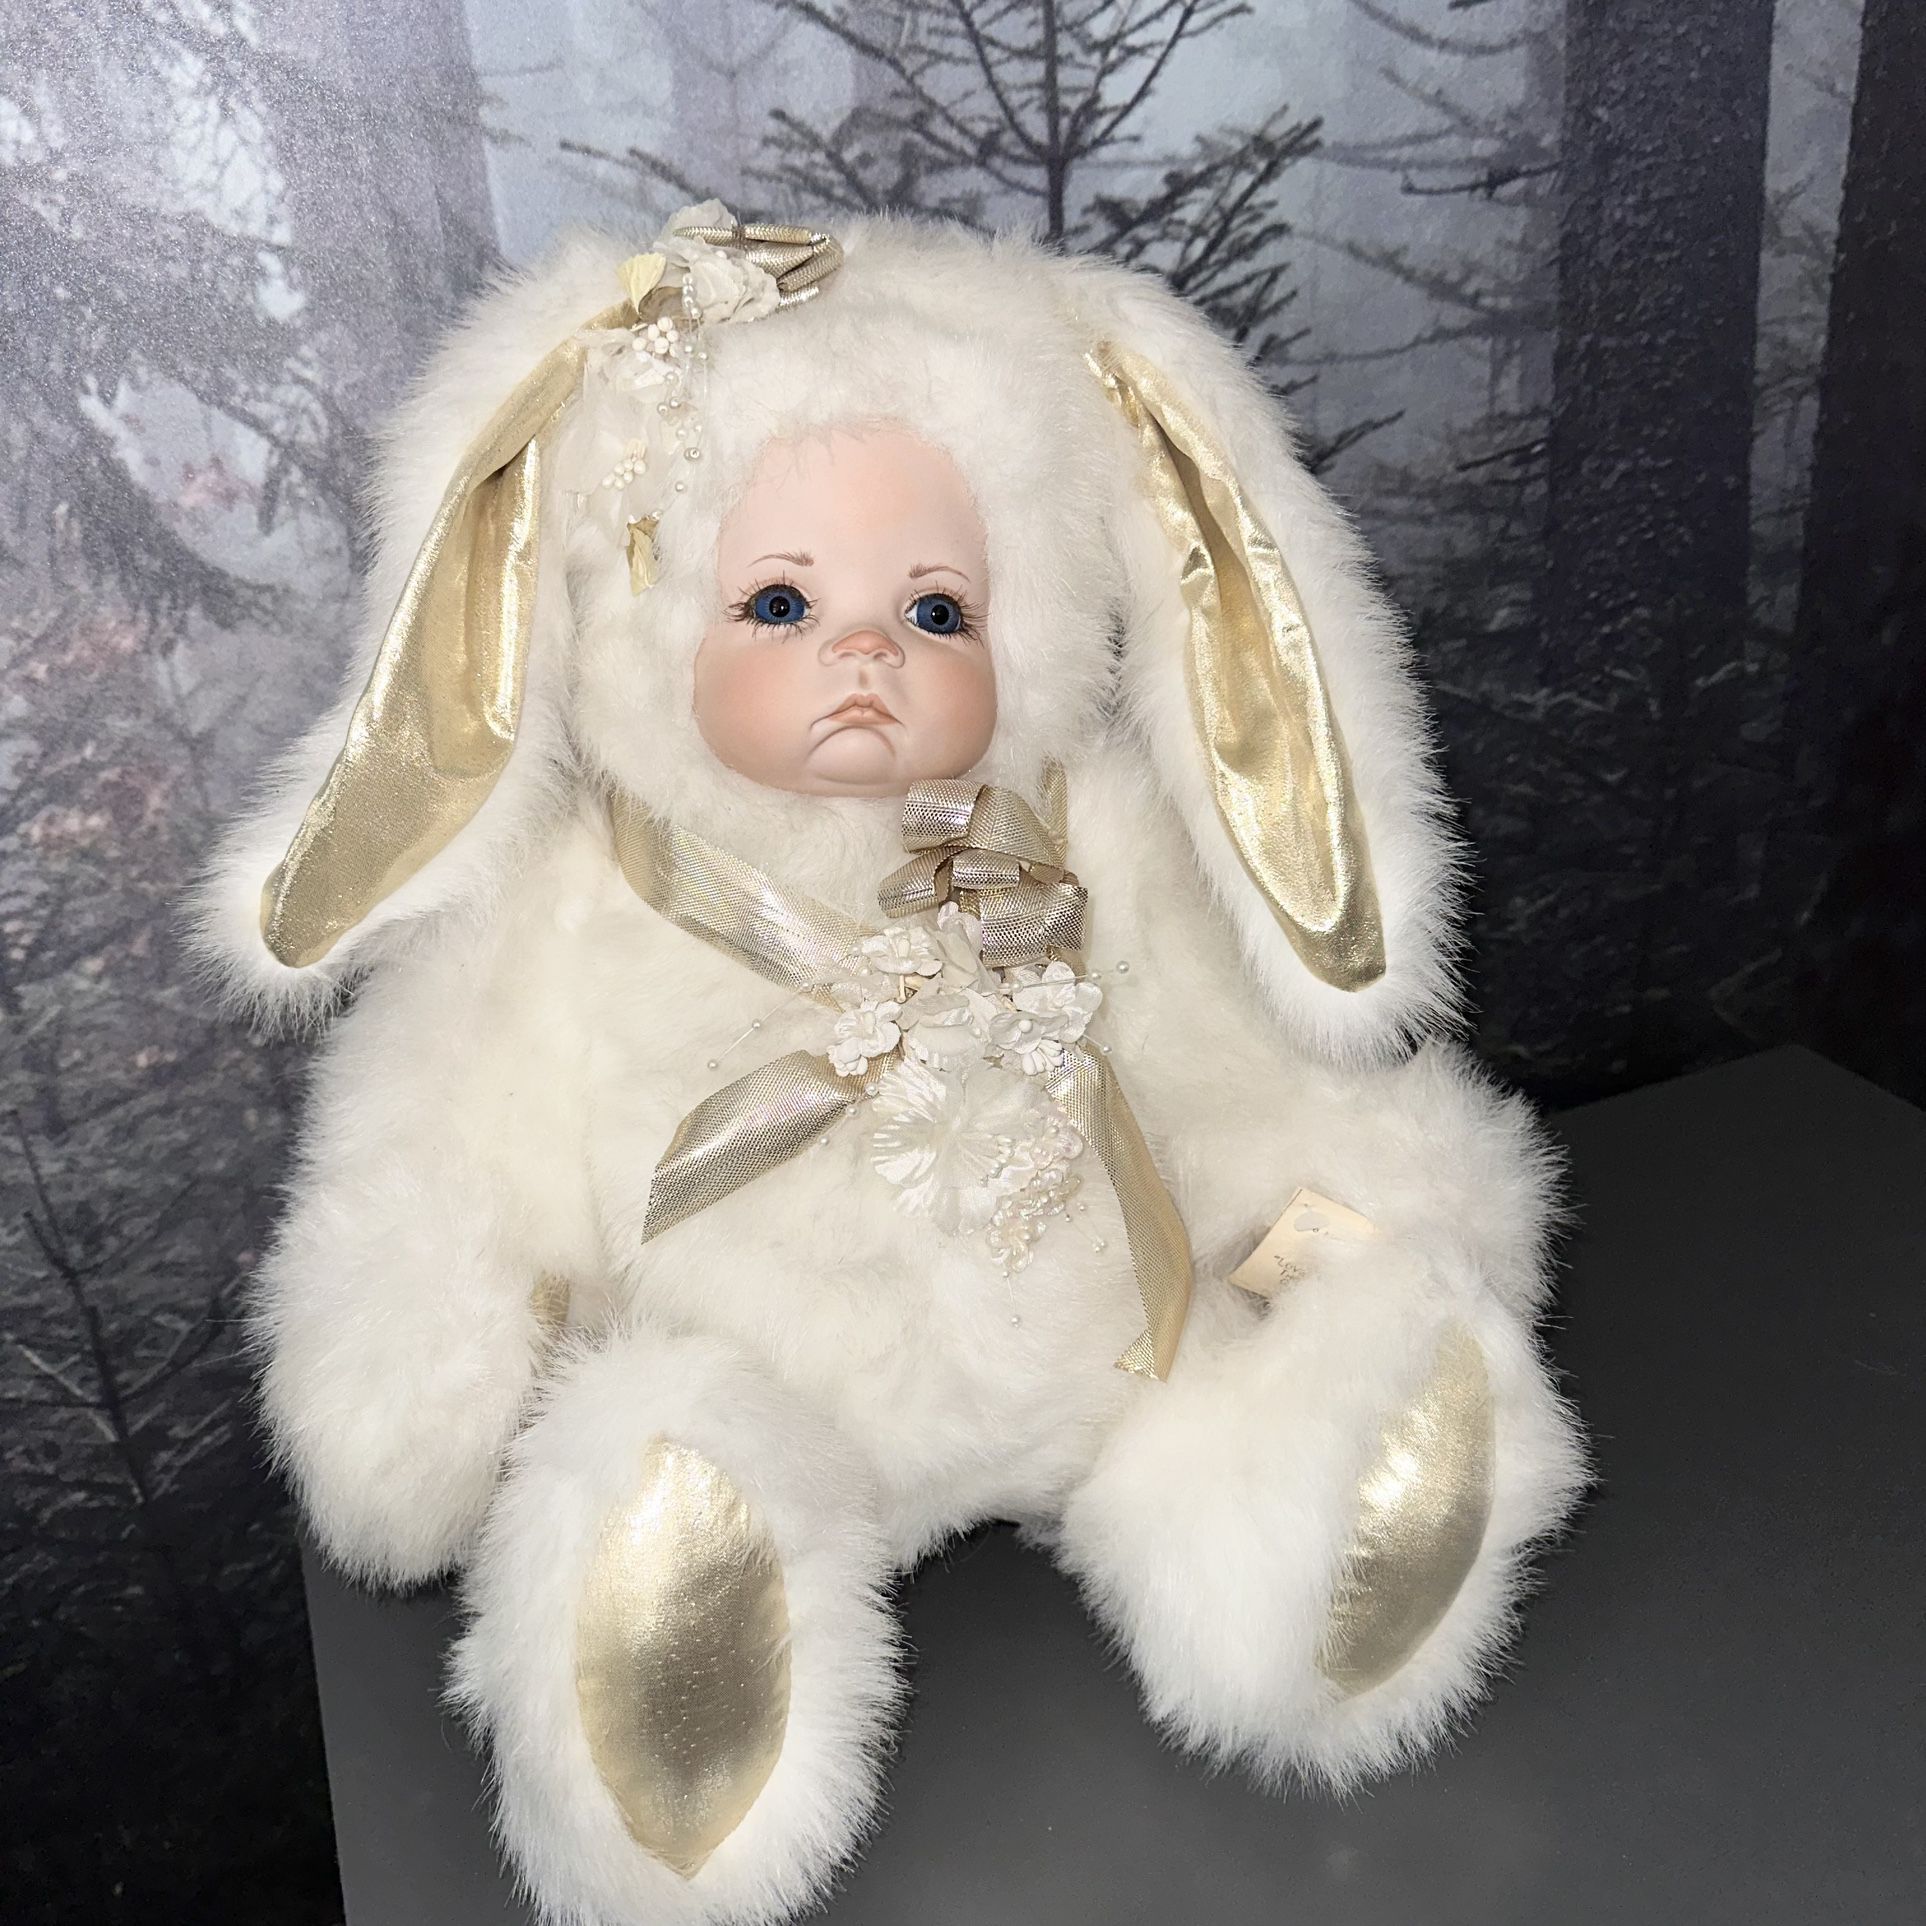 Adorable vintage "musical Doll" In Plush White Fur Bunny Outfit (21")